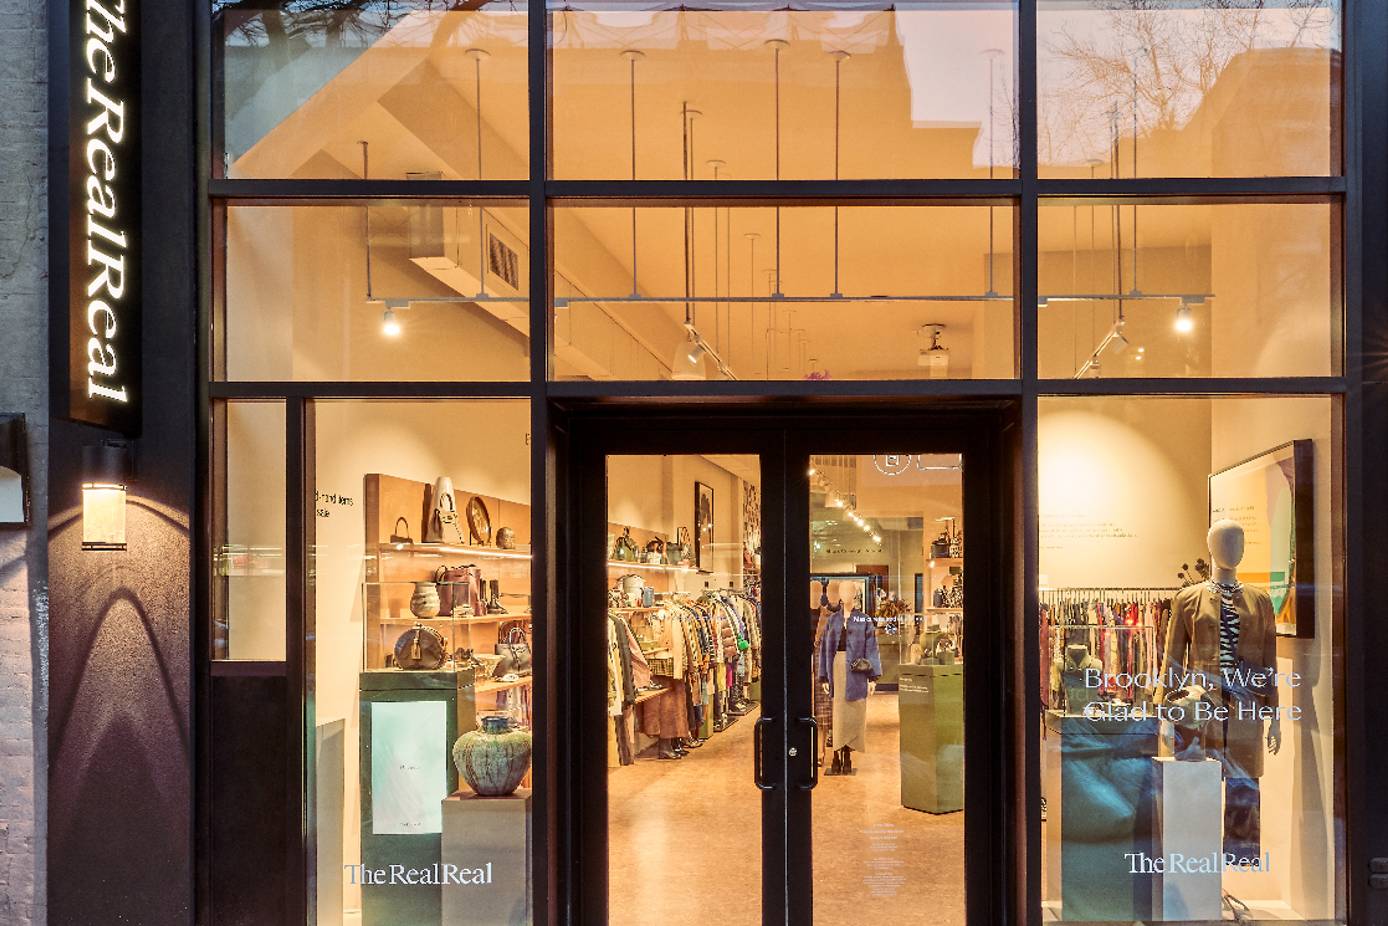 Online luxury consignment retailer takes another dive into brick-and-mortar